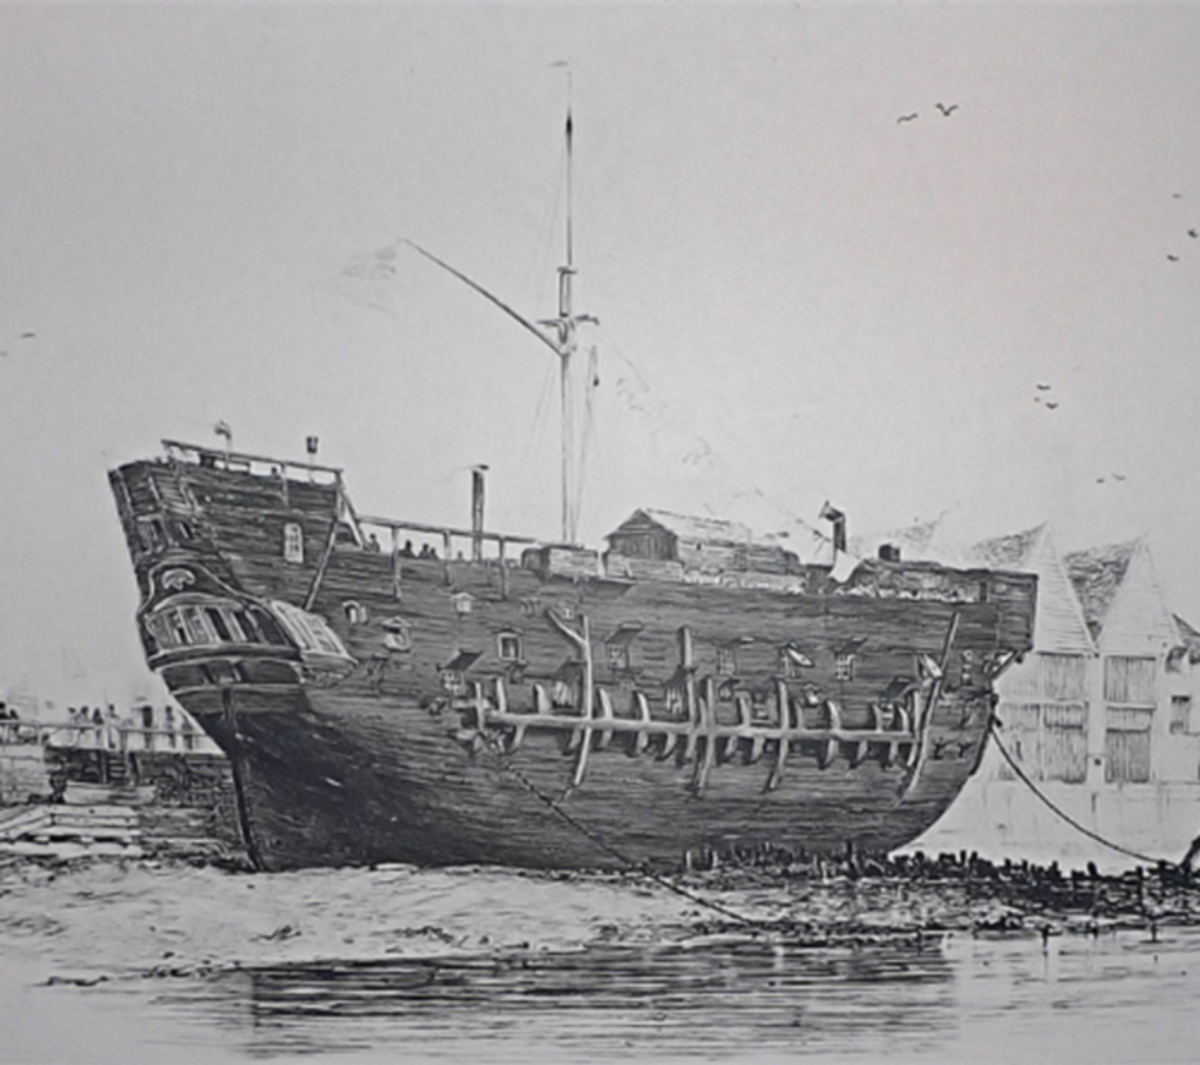 The beached convict ship HMS Discovery at Deptford. Launched as a 10-gun sloop at Rotherhithe in 1789, the ship served as a convict hulk from 1818 until scrapped in February 1834